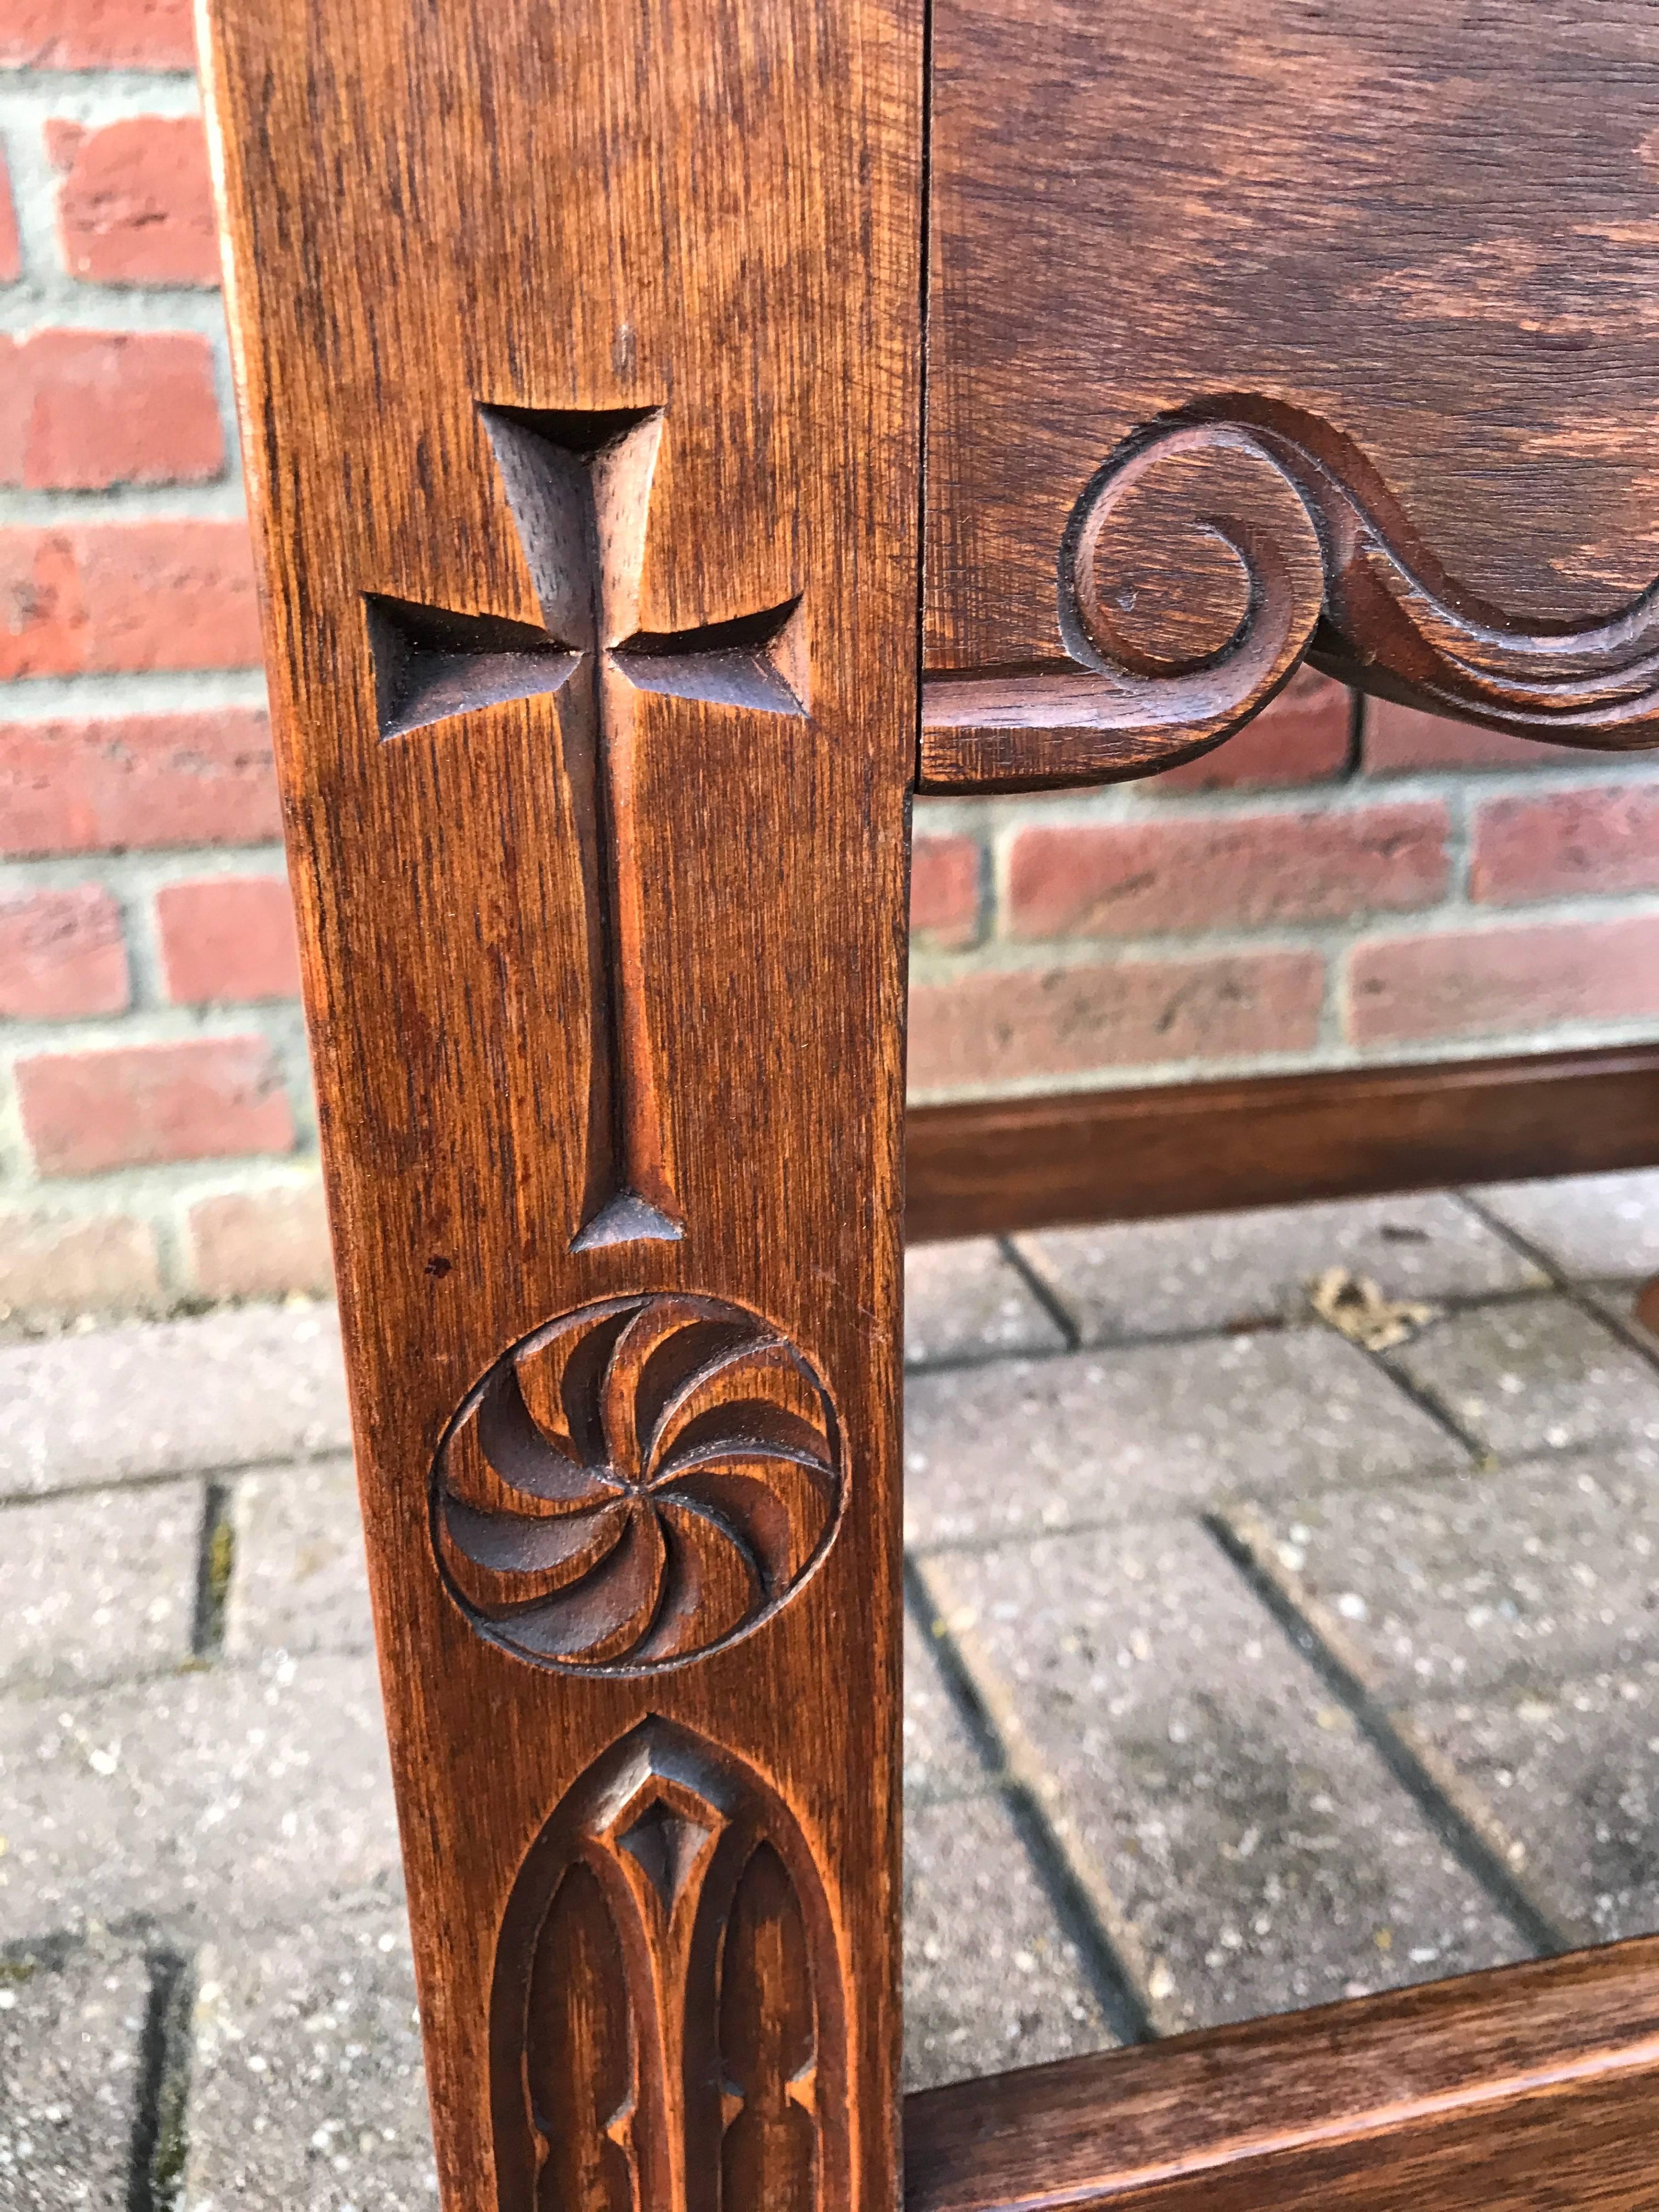 Hand-Crafted Unique and Quality Carved Gothic Revival Oak Stool with Original Leather Seating